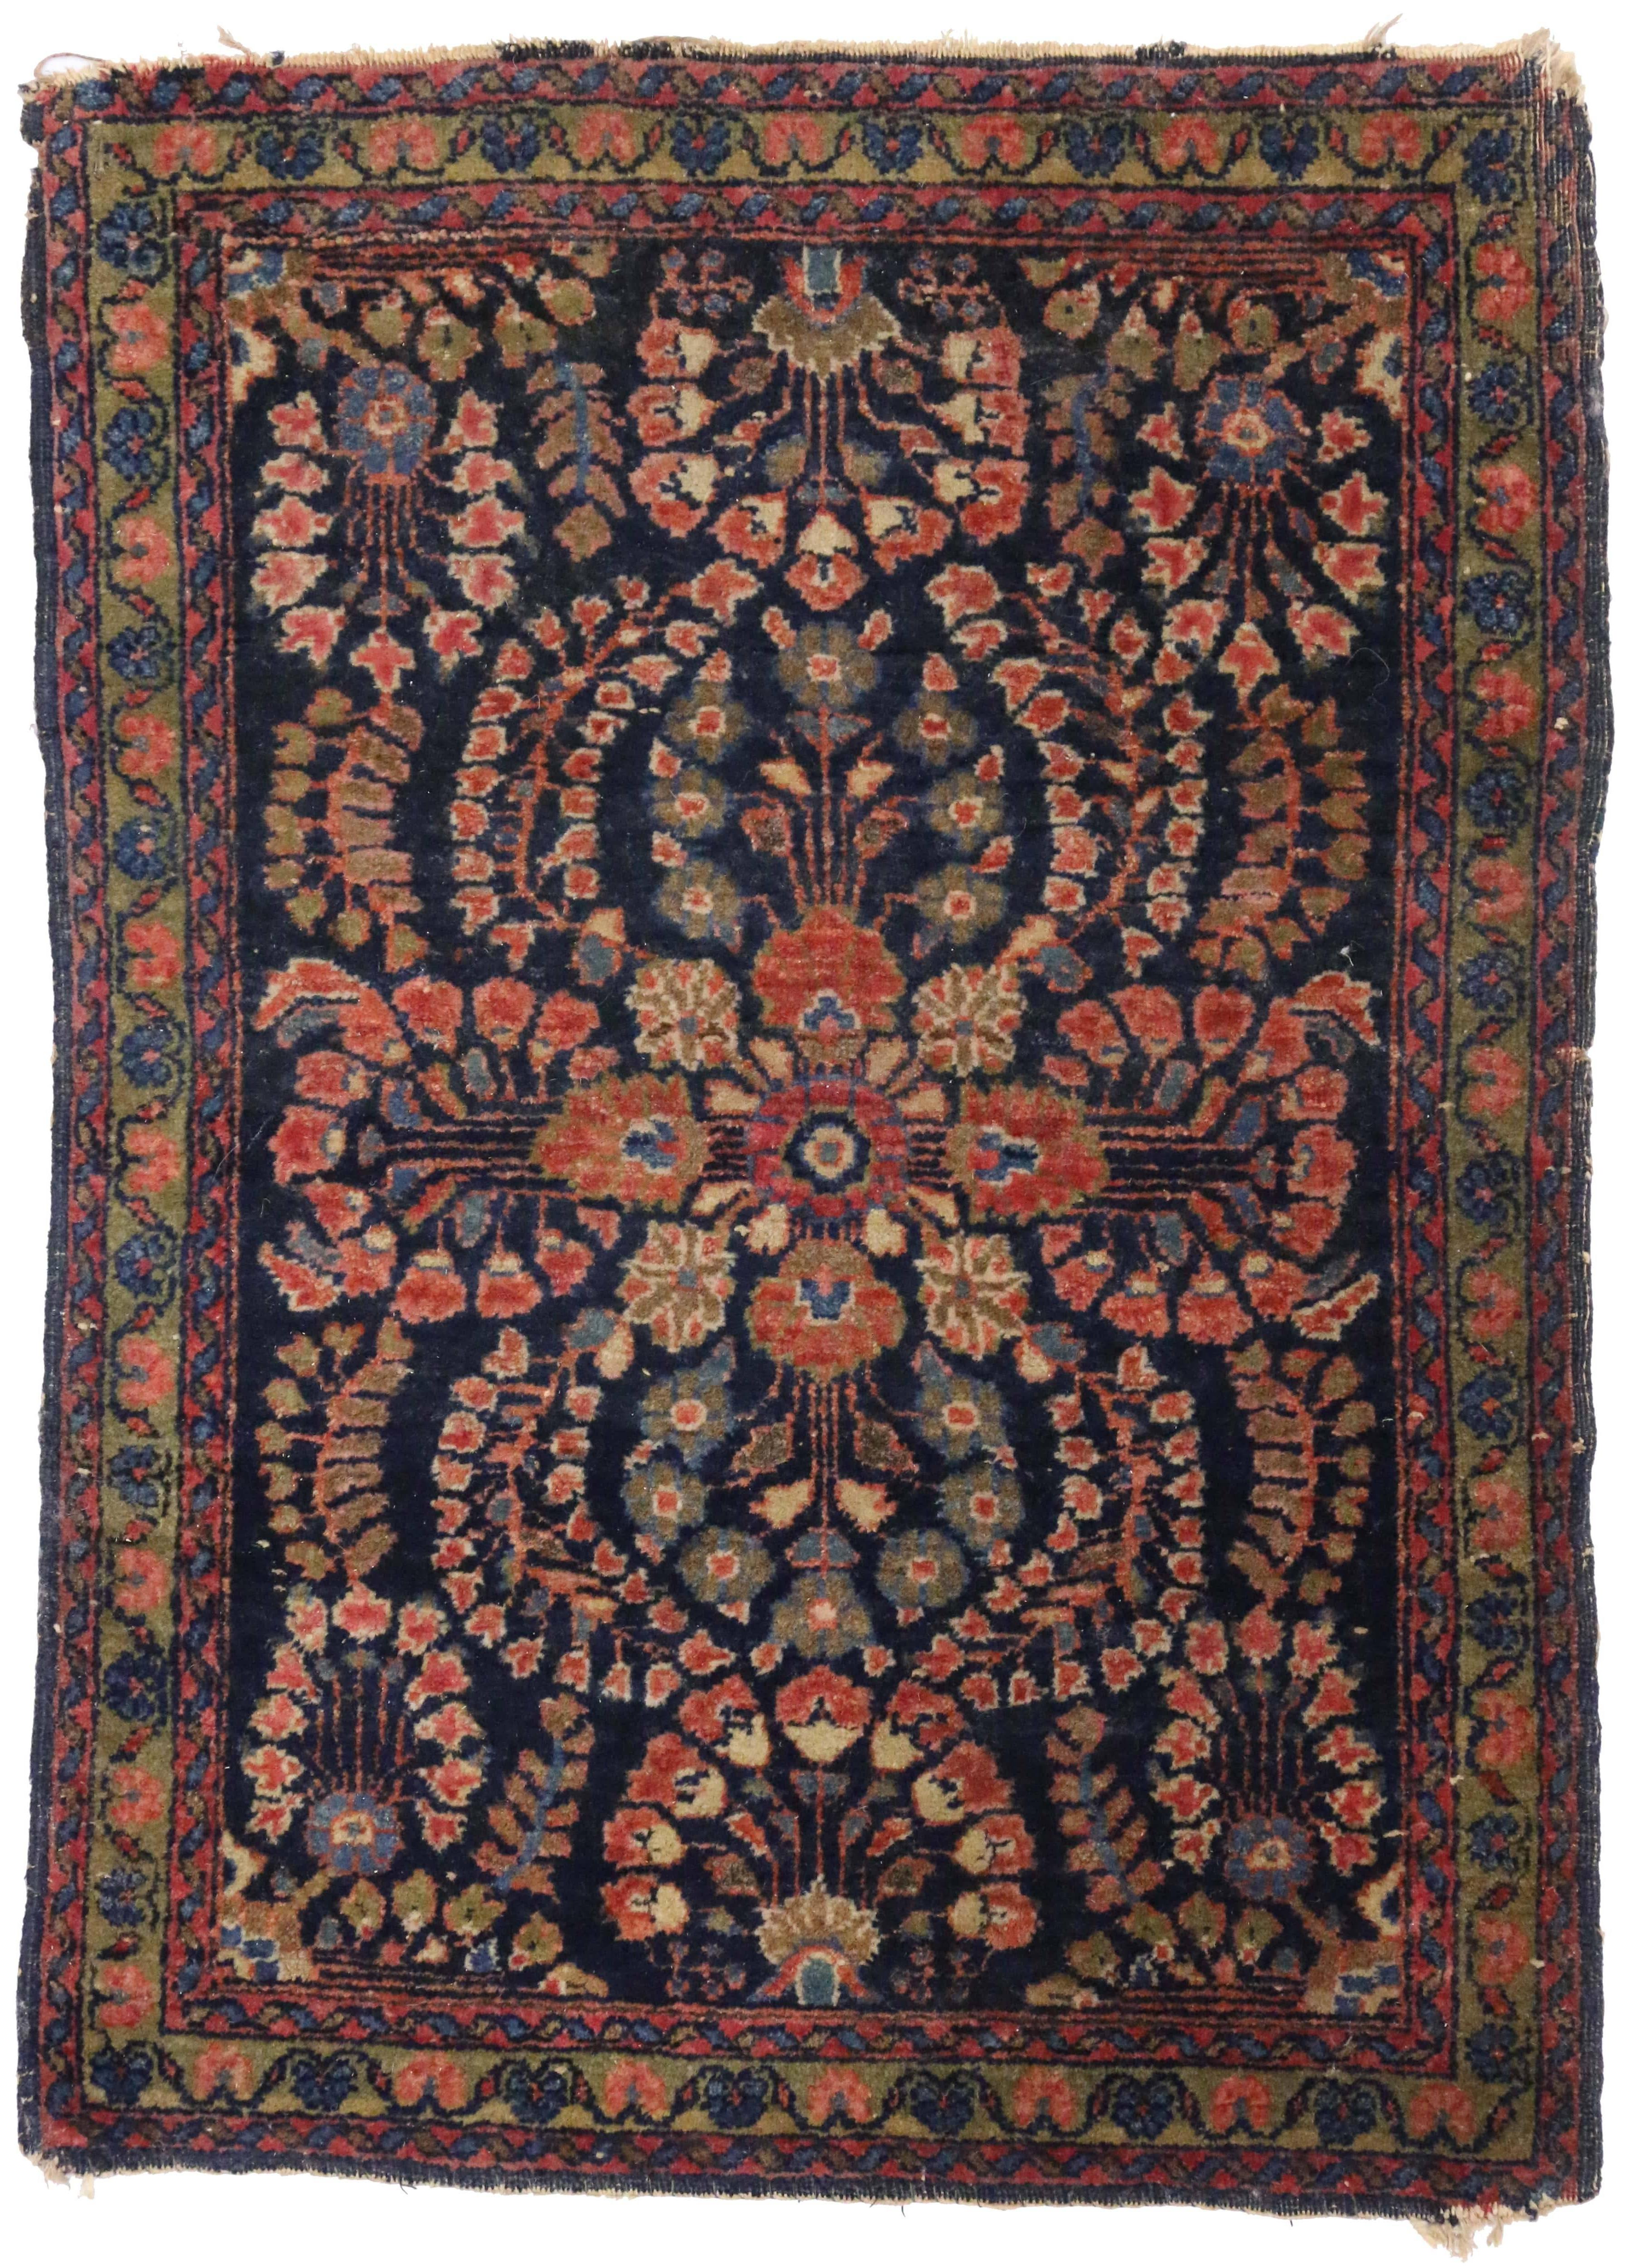 74477 Antique Persian Sarouk Accent Rug, Small Persian Rug with Modern Victorian Style 01'10 x 02'07. This hand-knotted antique Persian Sarouk accent rug features a central cruciform shaped medallion made up of palmettes with concentric rings of